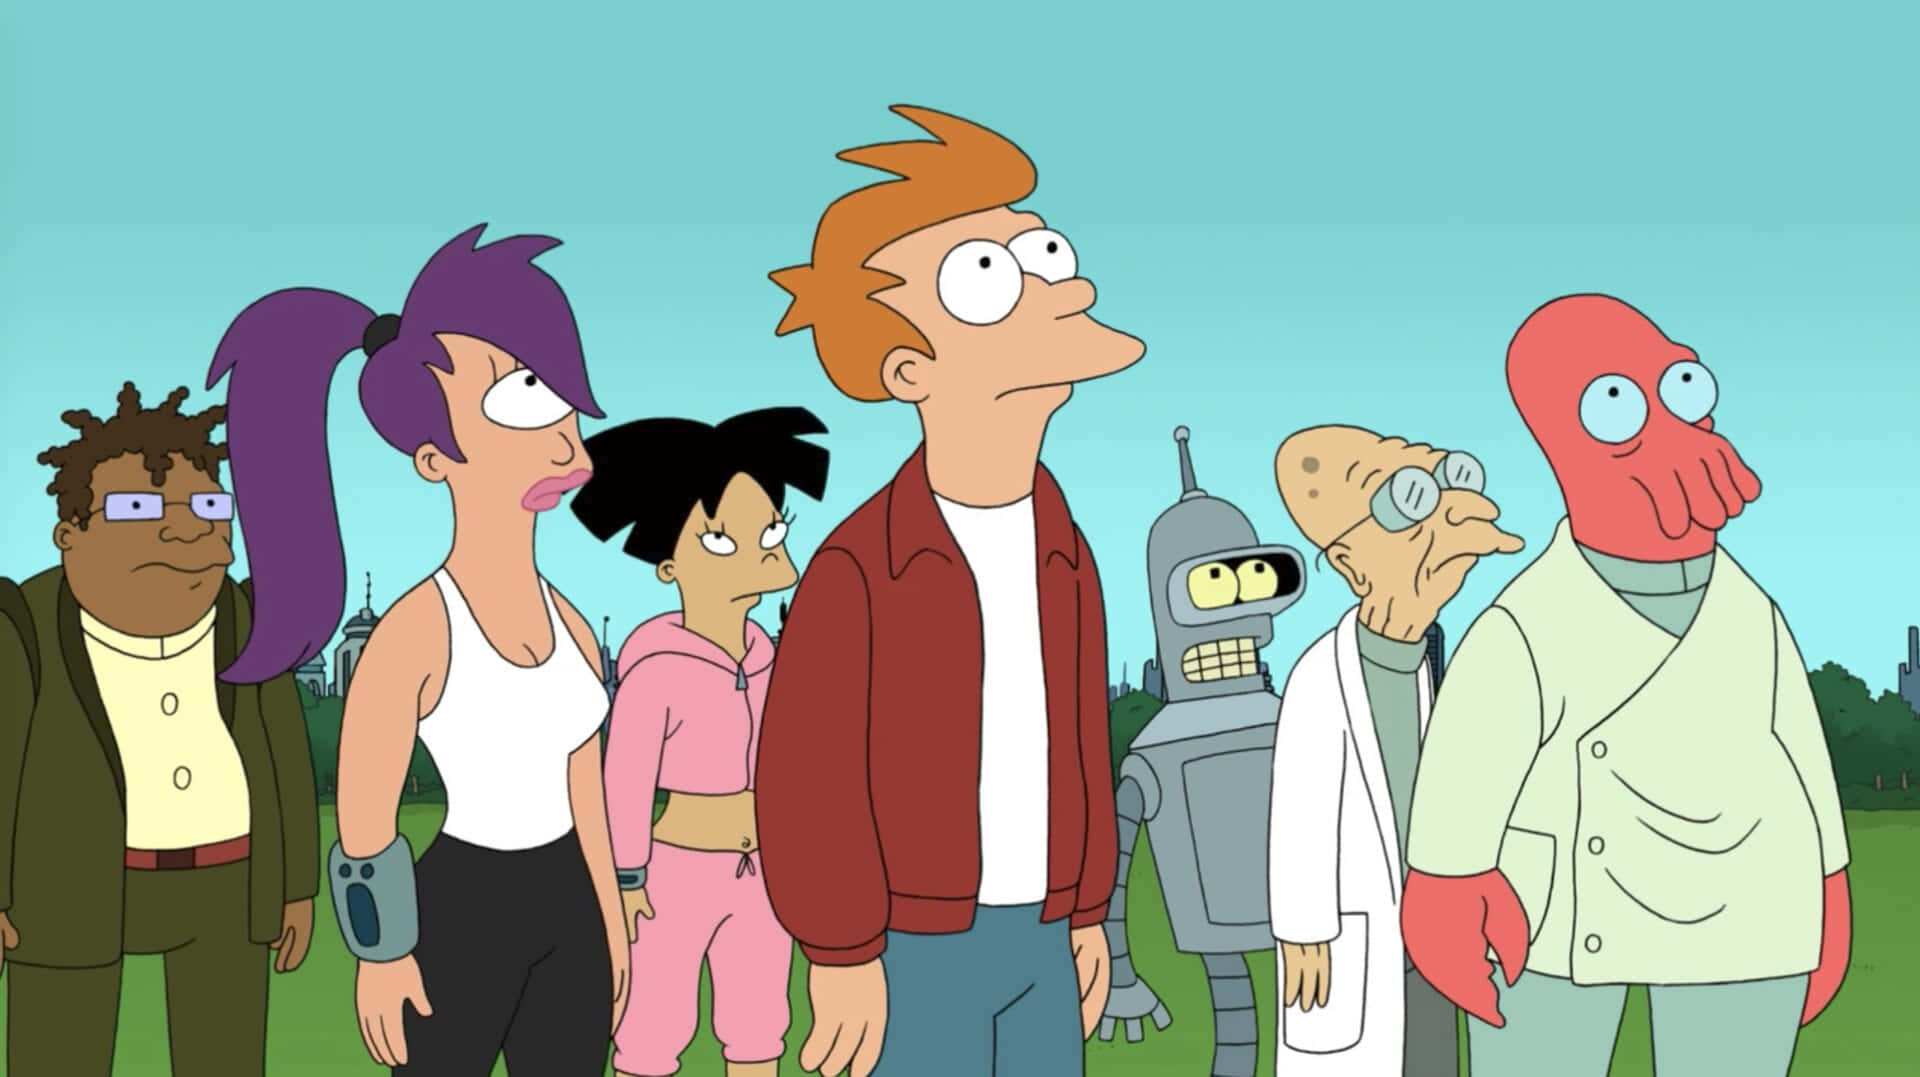 "Let Futurama's Bender and Fry Be Your Escape From Reality"